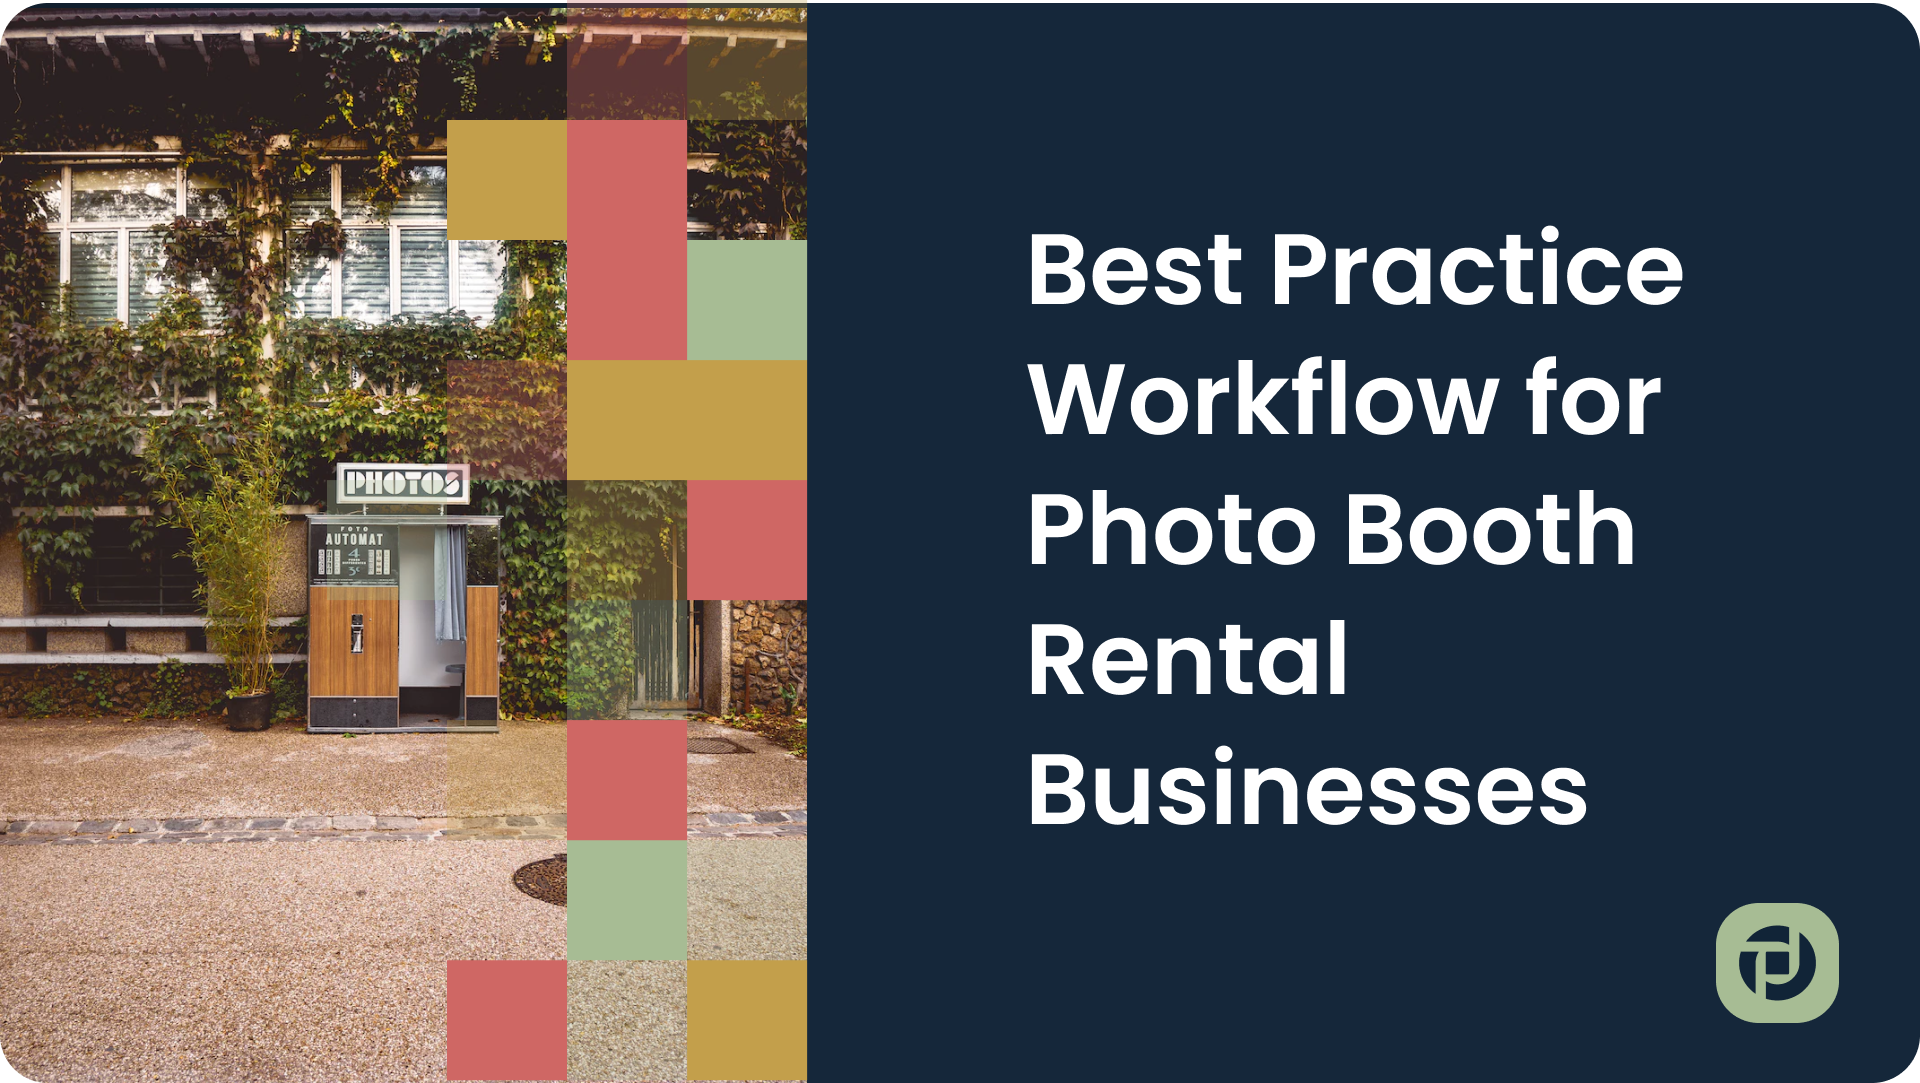 Best Practice Workflow for Photo Booth Rental Businesses